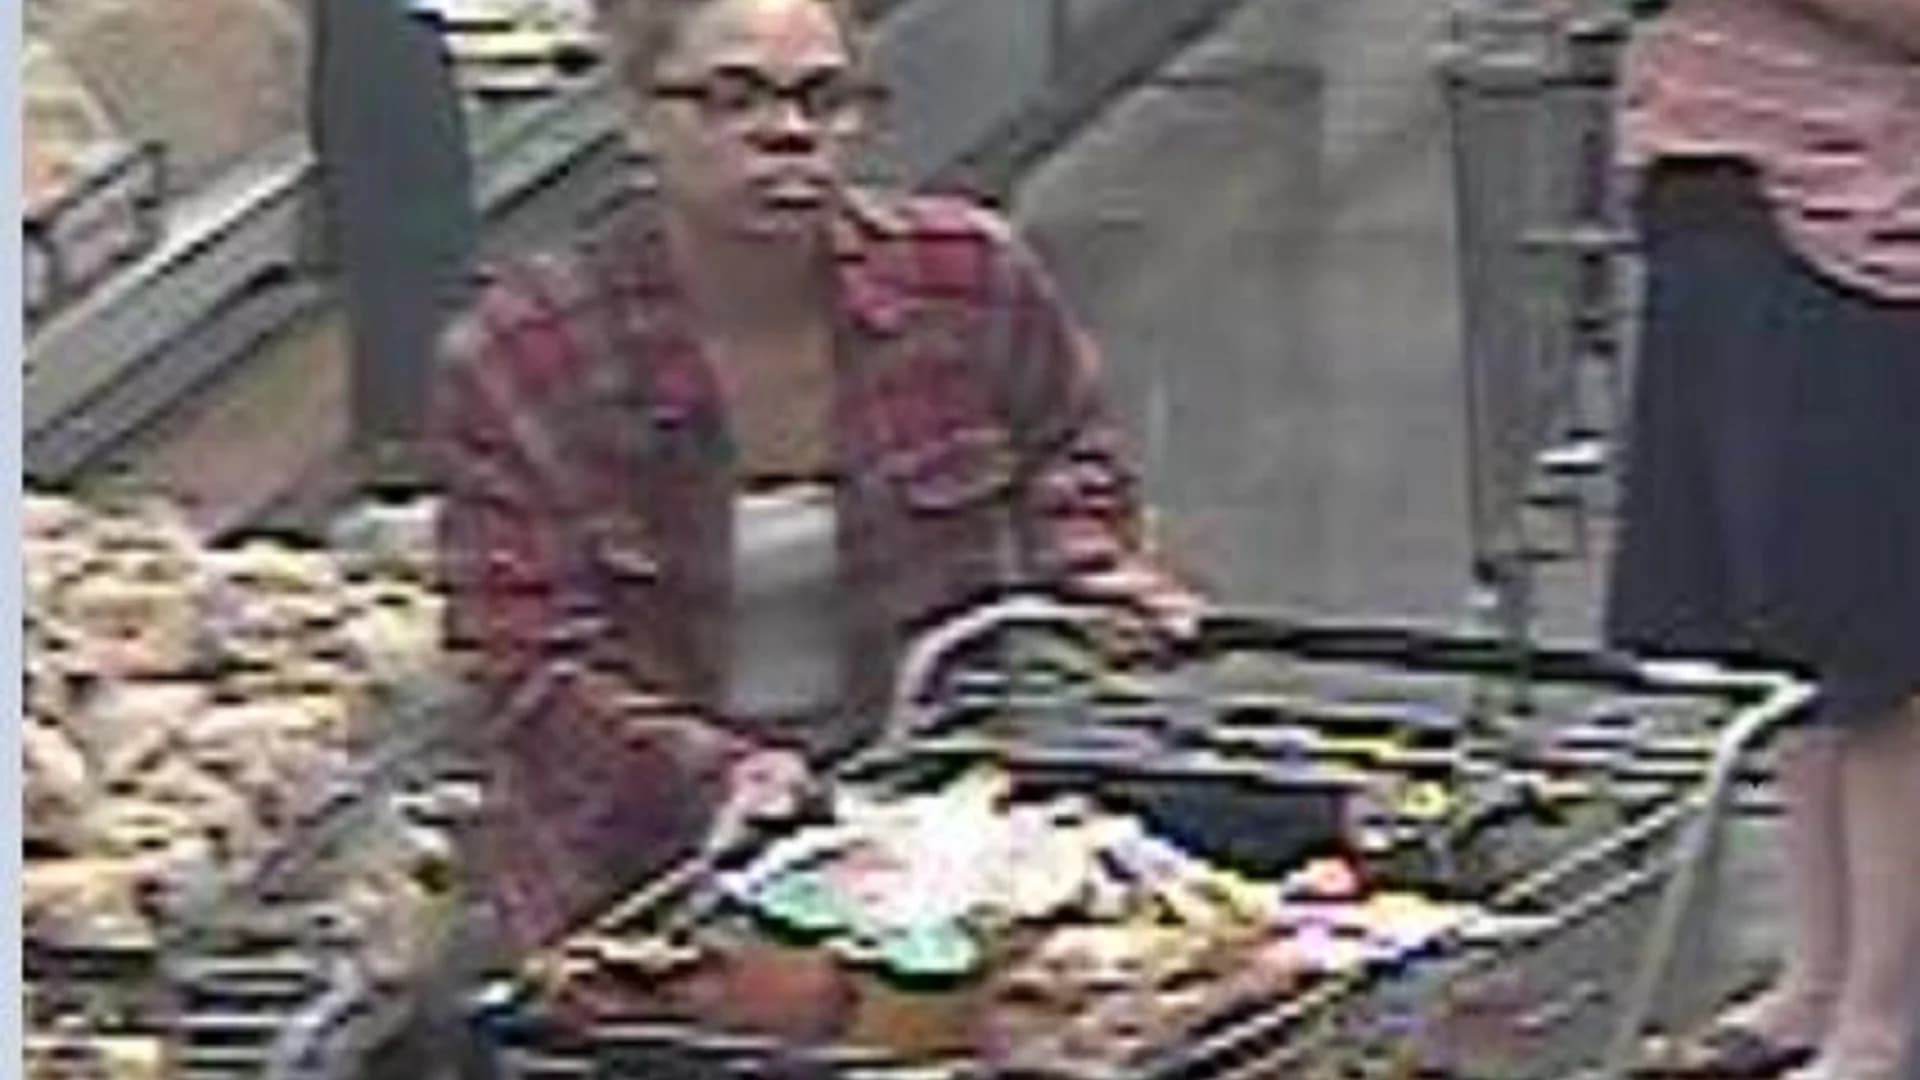 Police: Woman sought for stealing items from South Setauket supermarket 